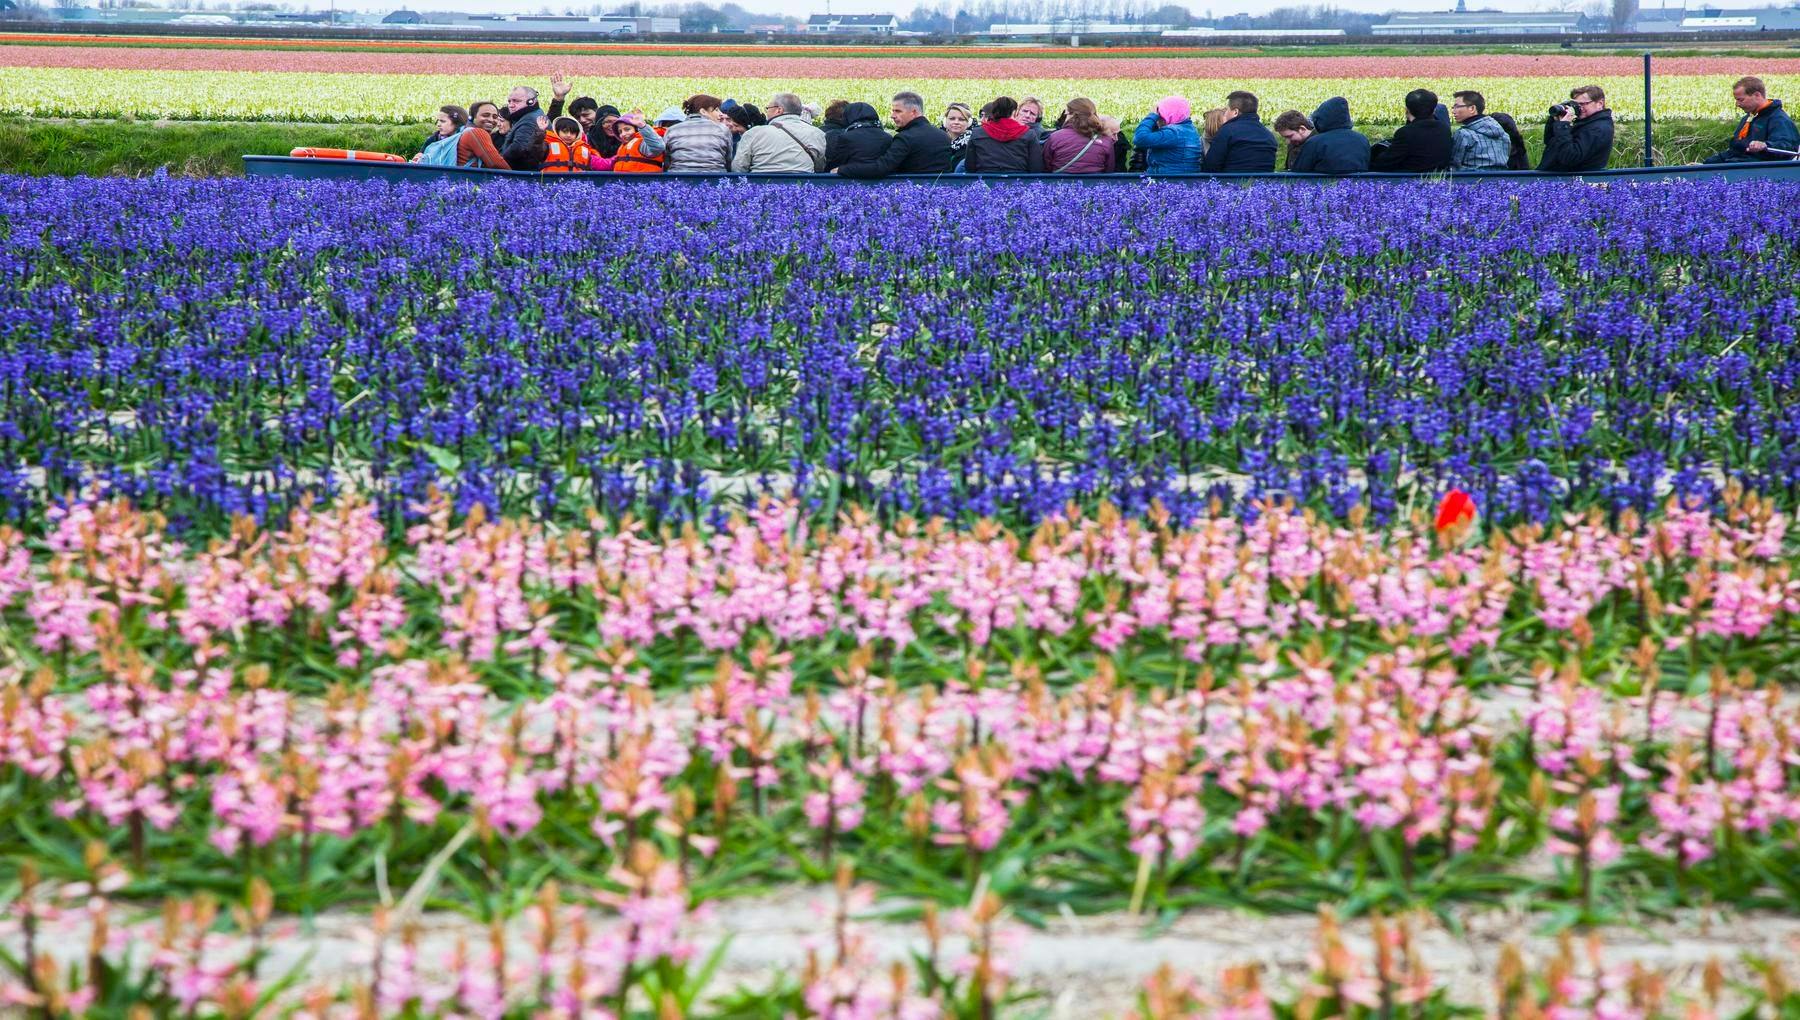 Keukenhof - which is both a tourist attraction and a showcase for the Dutch flower-growing industry - displays millions of blooms every spring.